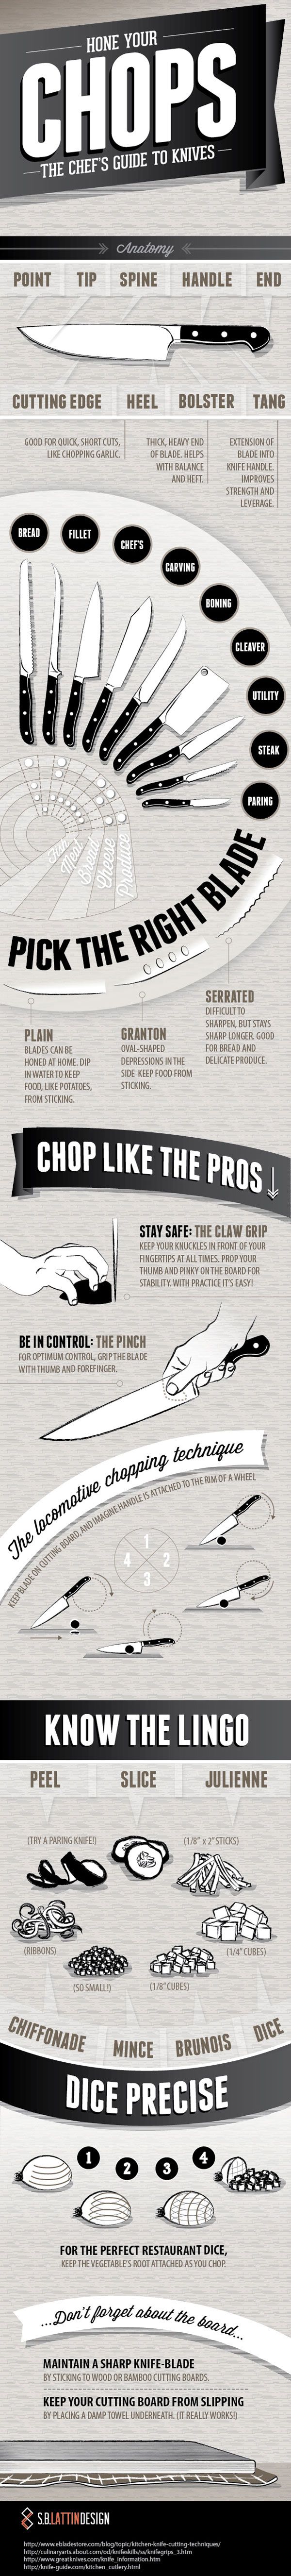 Guide to Knives &#038; Chopping (Infographic)